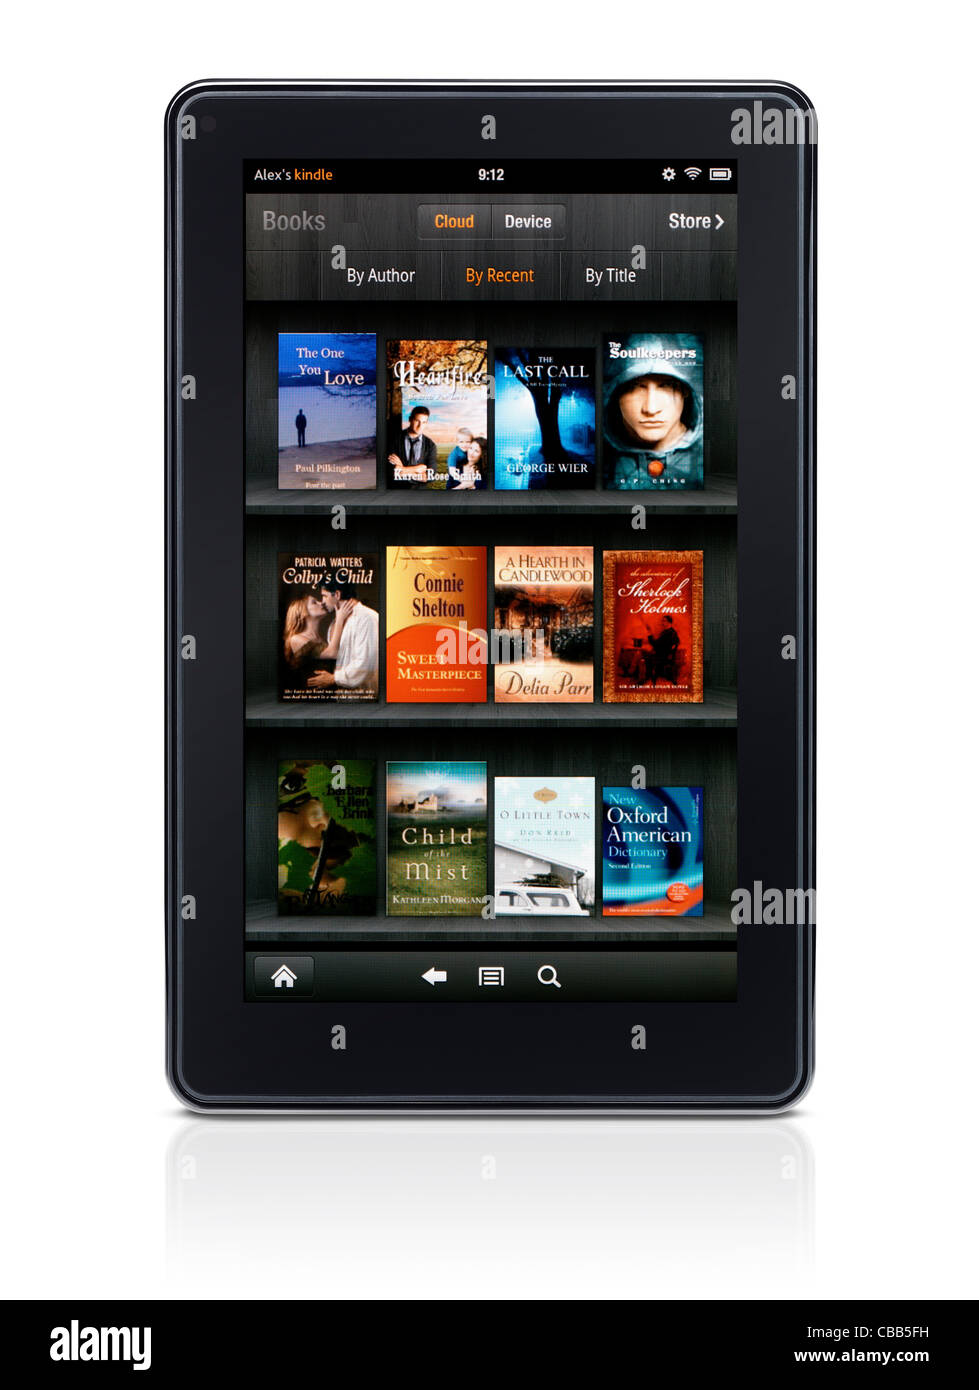 Amazon Kindle Fire Tablet Computer E Book Reader Displaying Book